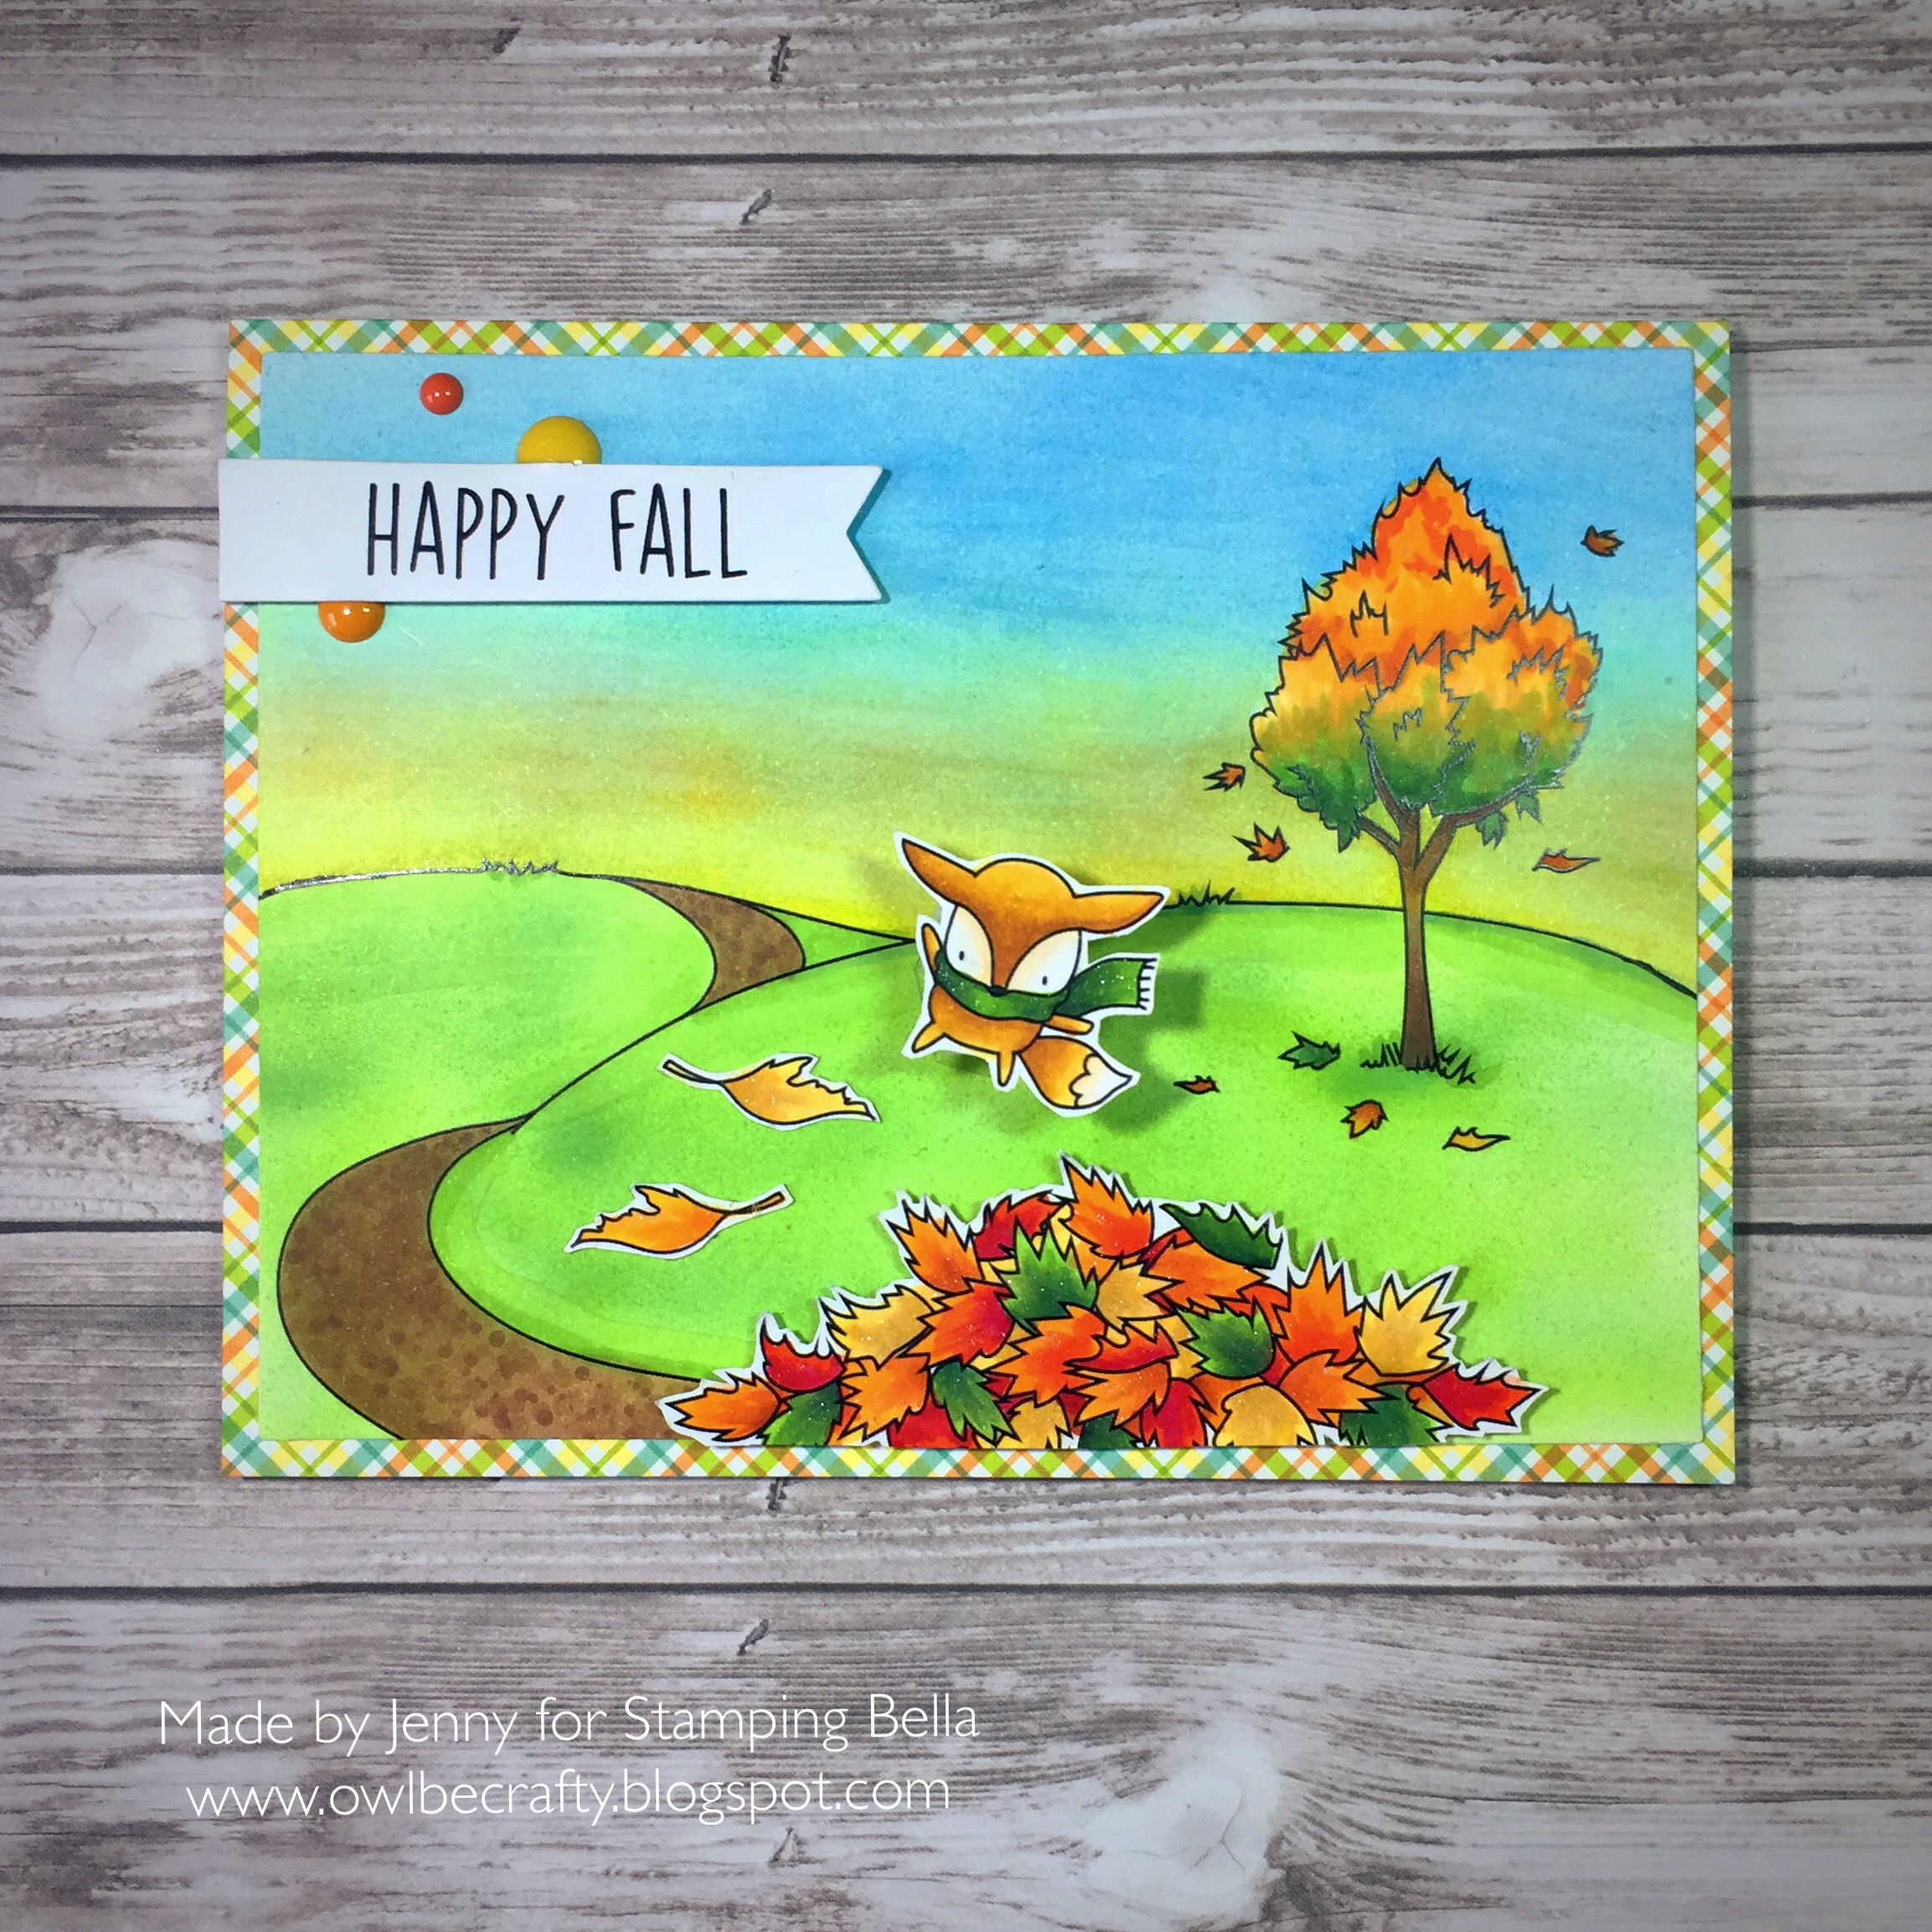 Stamping Bella SNEAK PEEK DAY 2 : LITTLE BITS NATURE COLLECTION rubber stamp, FALL BACKDROP RUBBER STAMP, FALL SENTIMENTS rubber stamp. Card by JENNY BORDEAUX